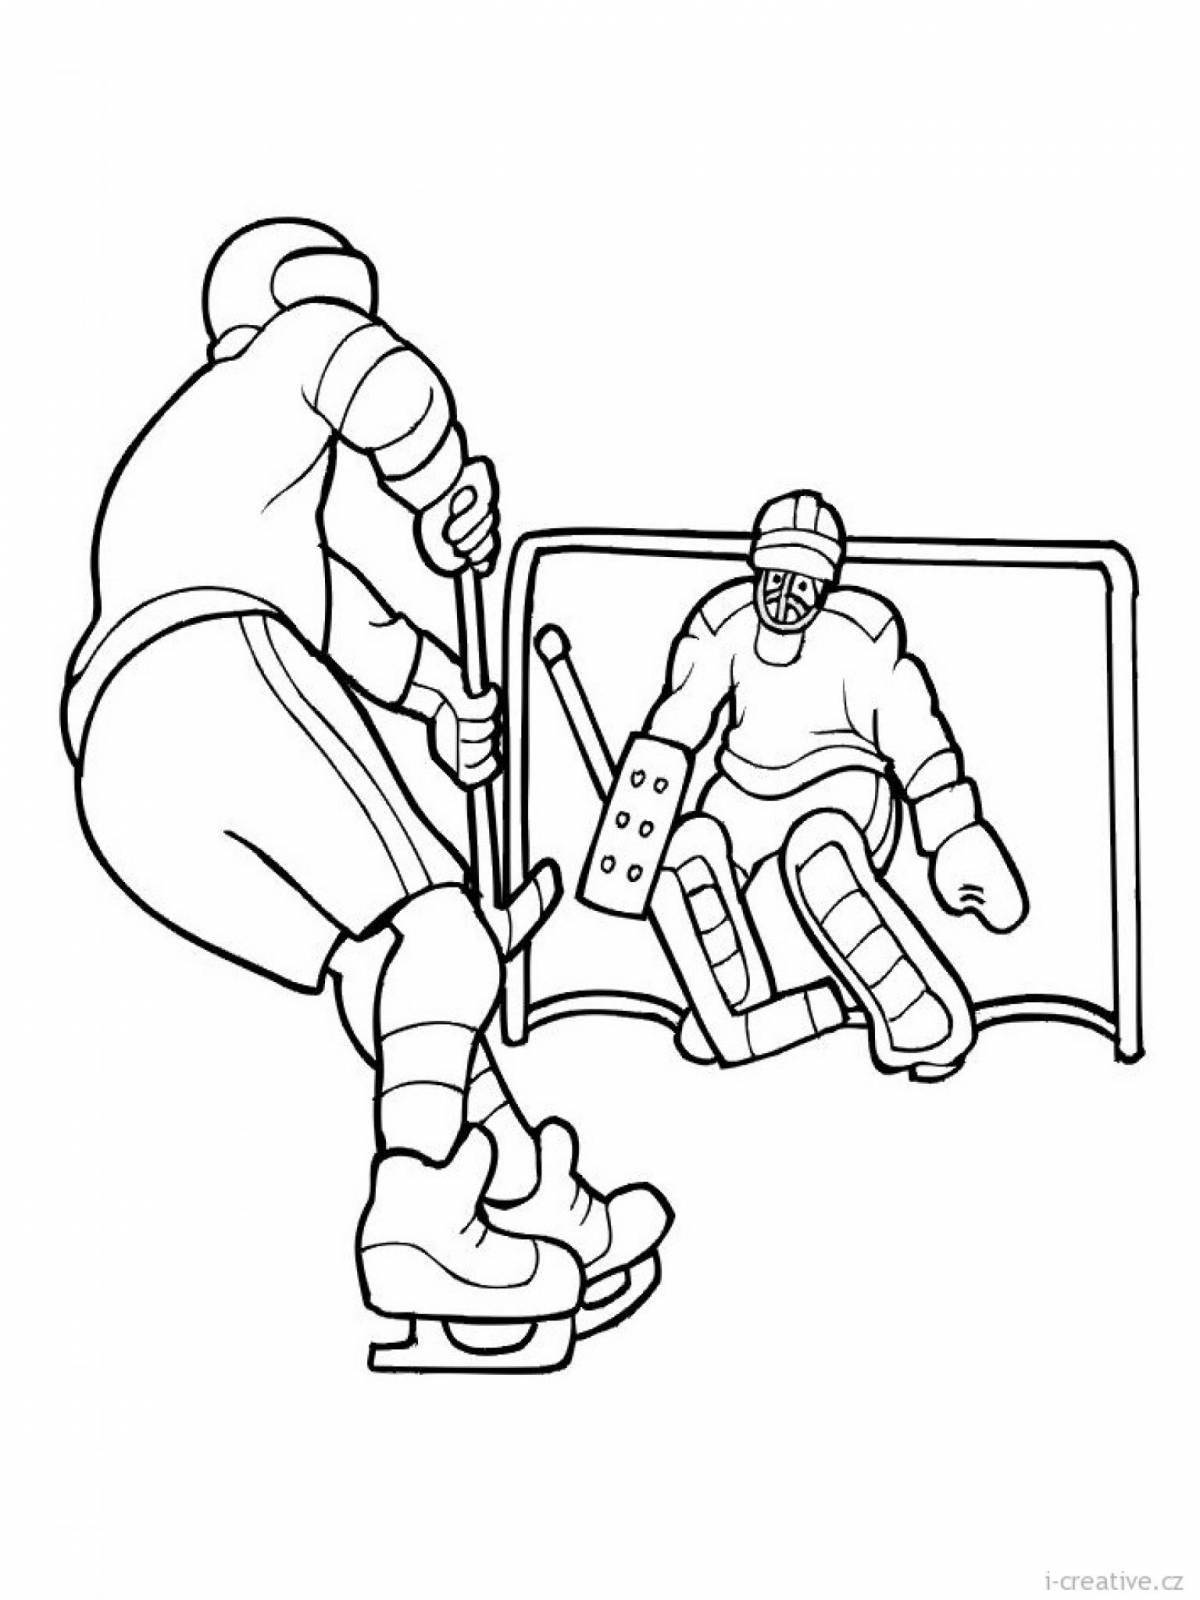 Fun coloring book hockey for kids